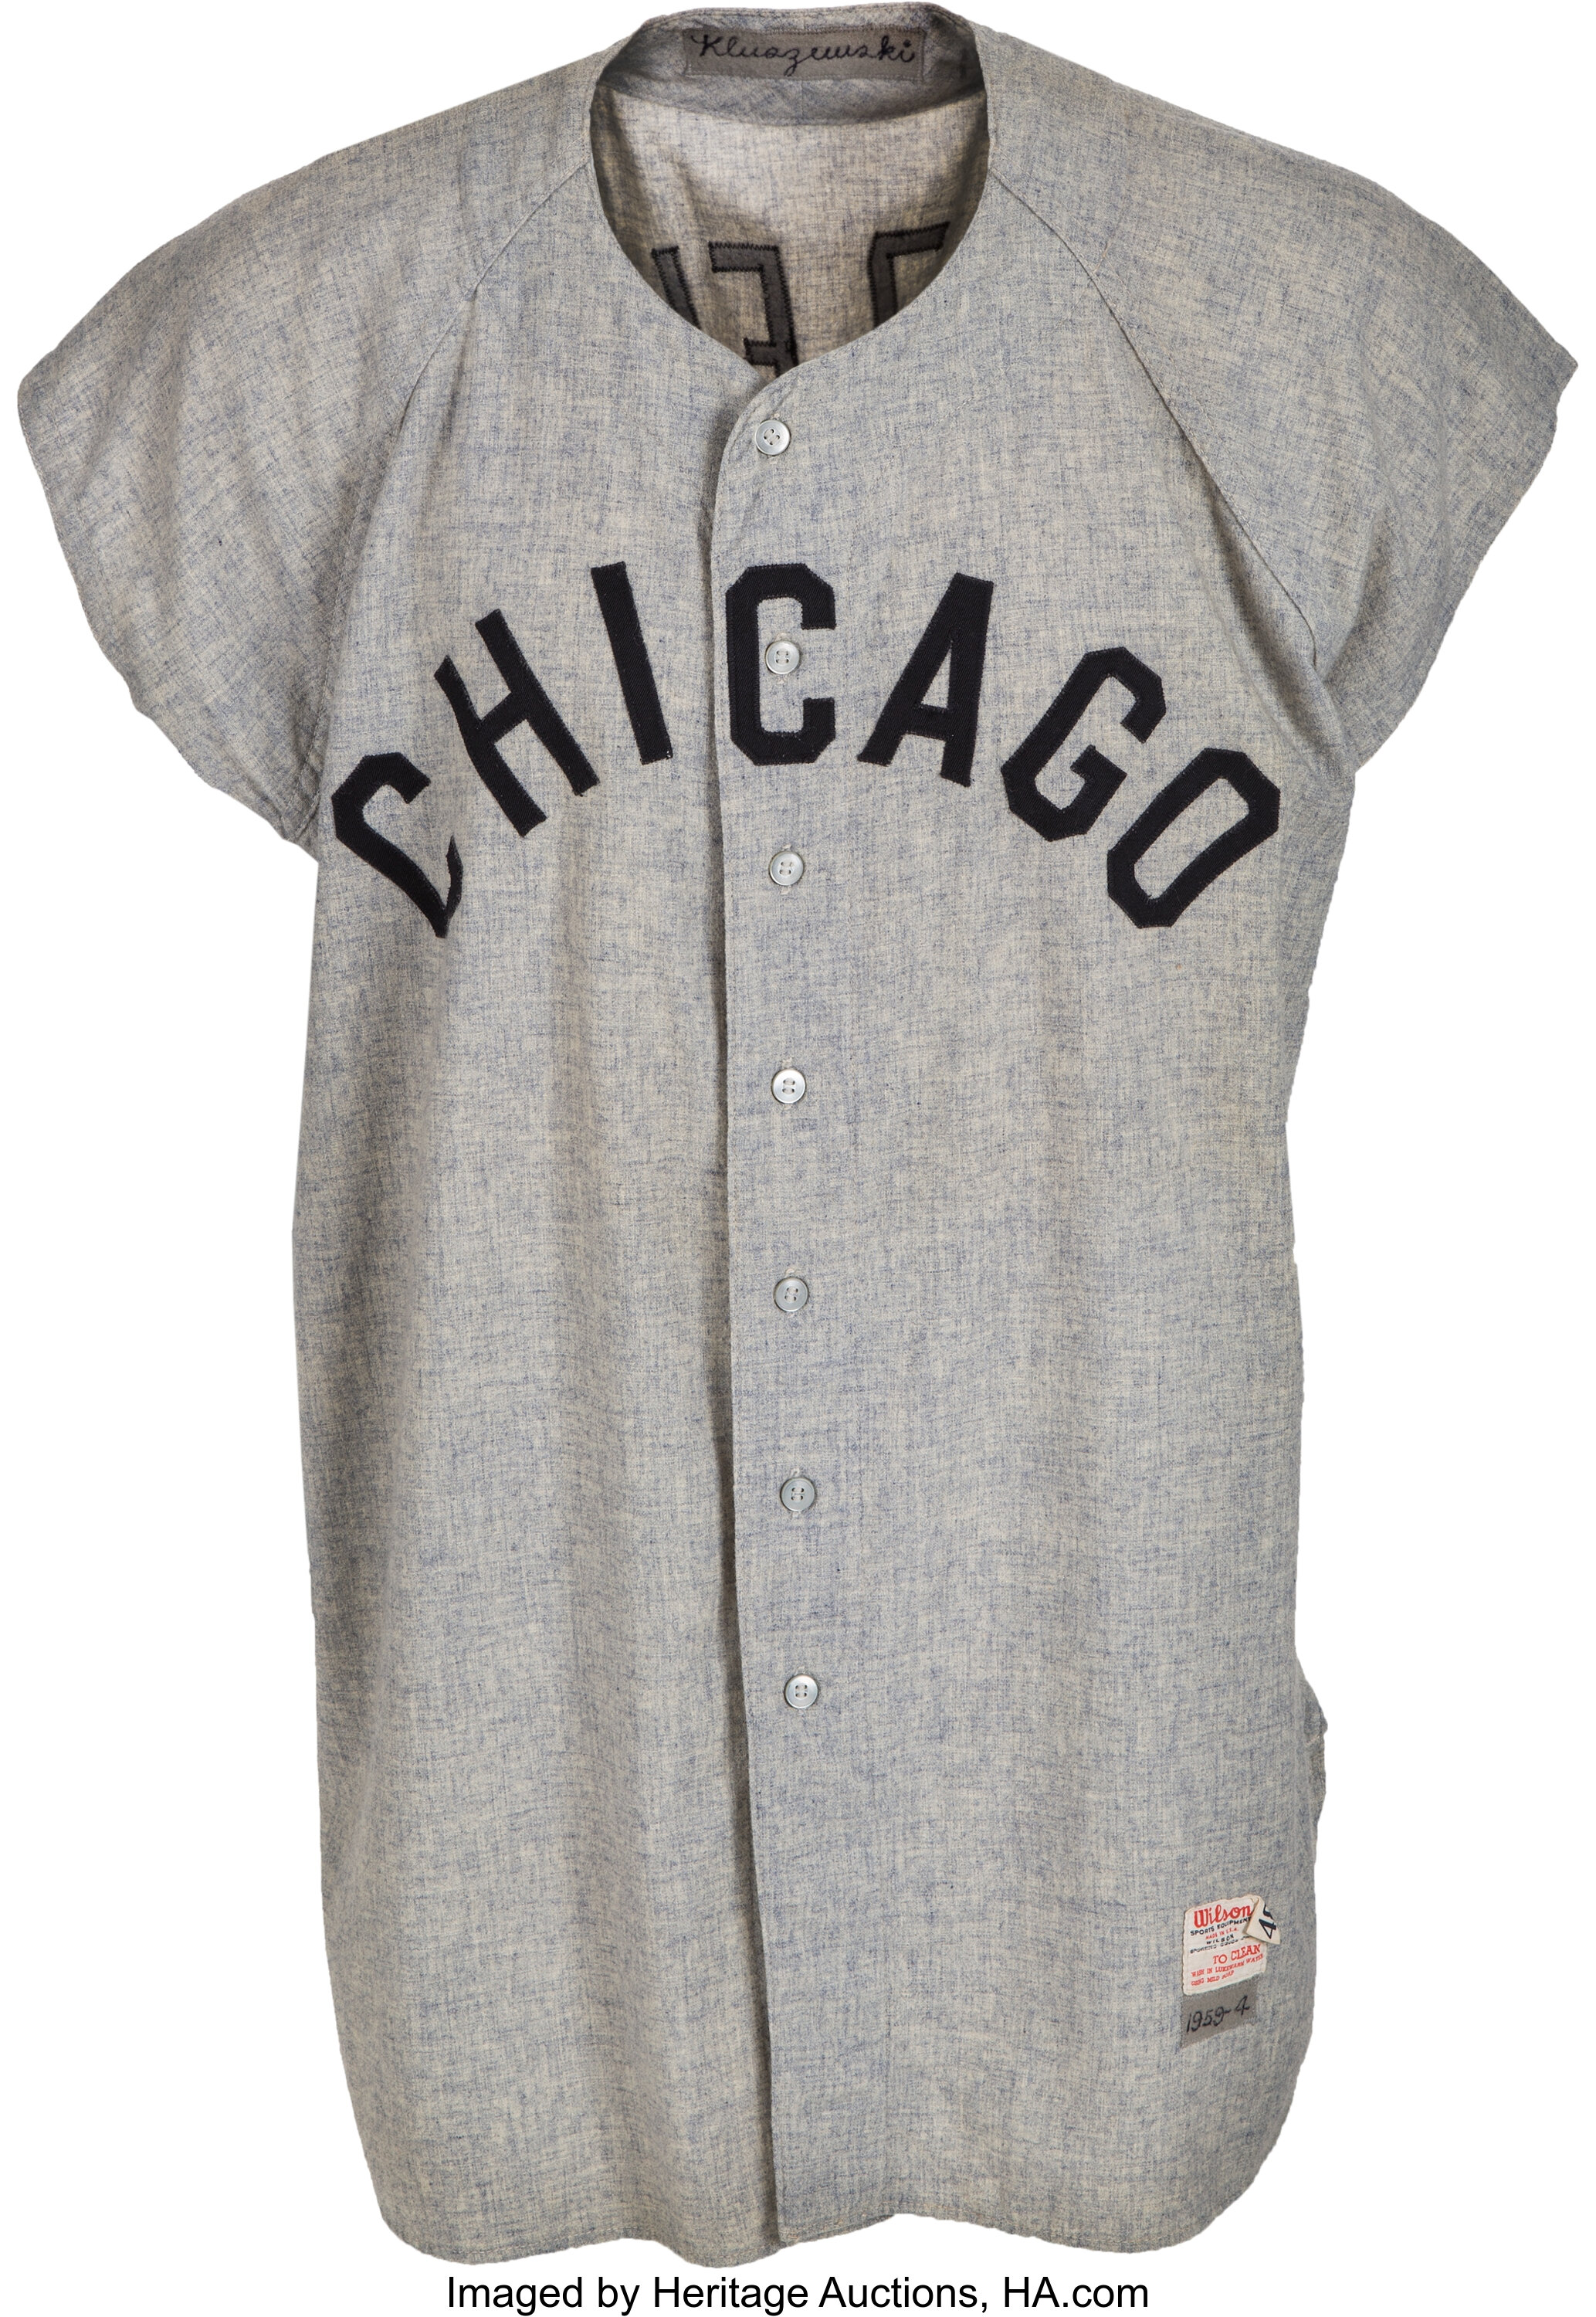 Authentic Chicago White Sox TBC 1959 Cool Base Throwback Jersey RARE! 40